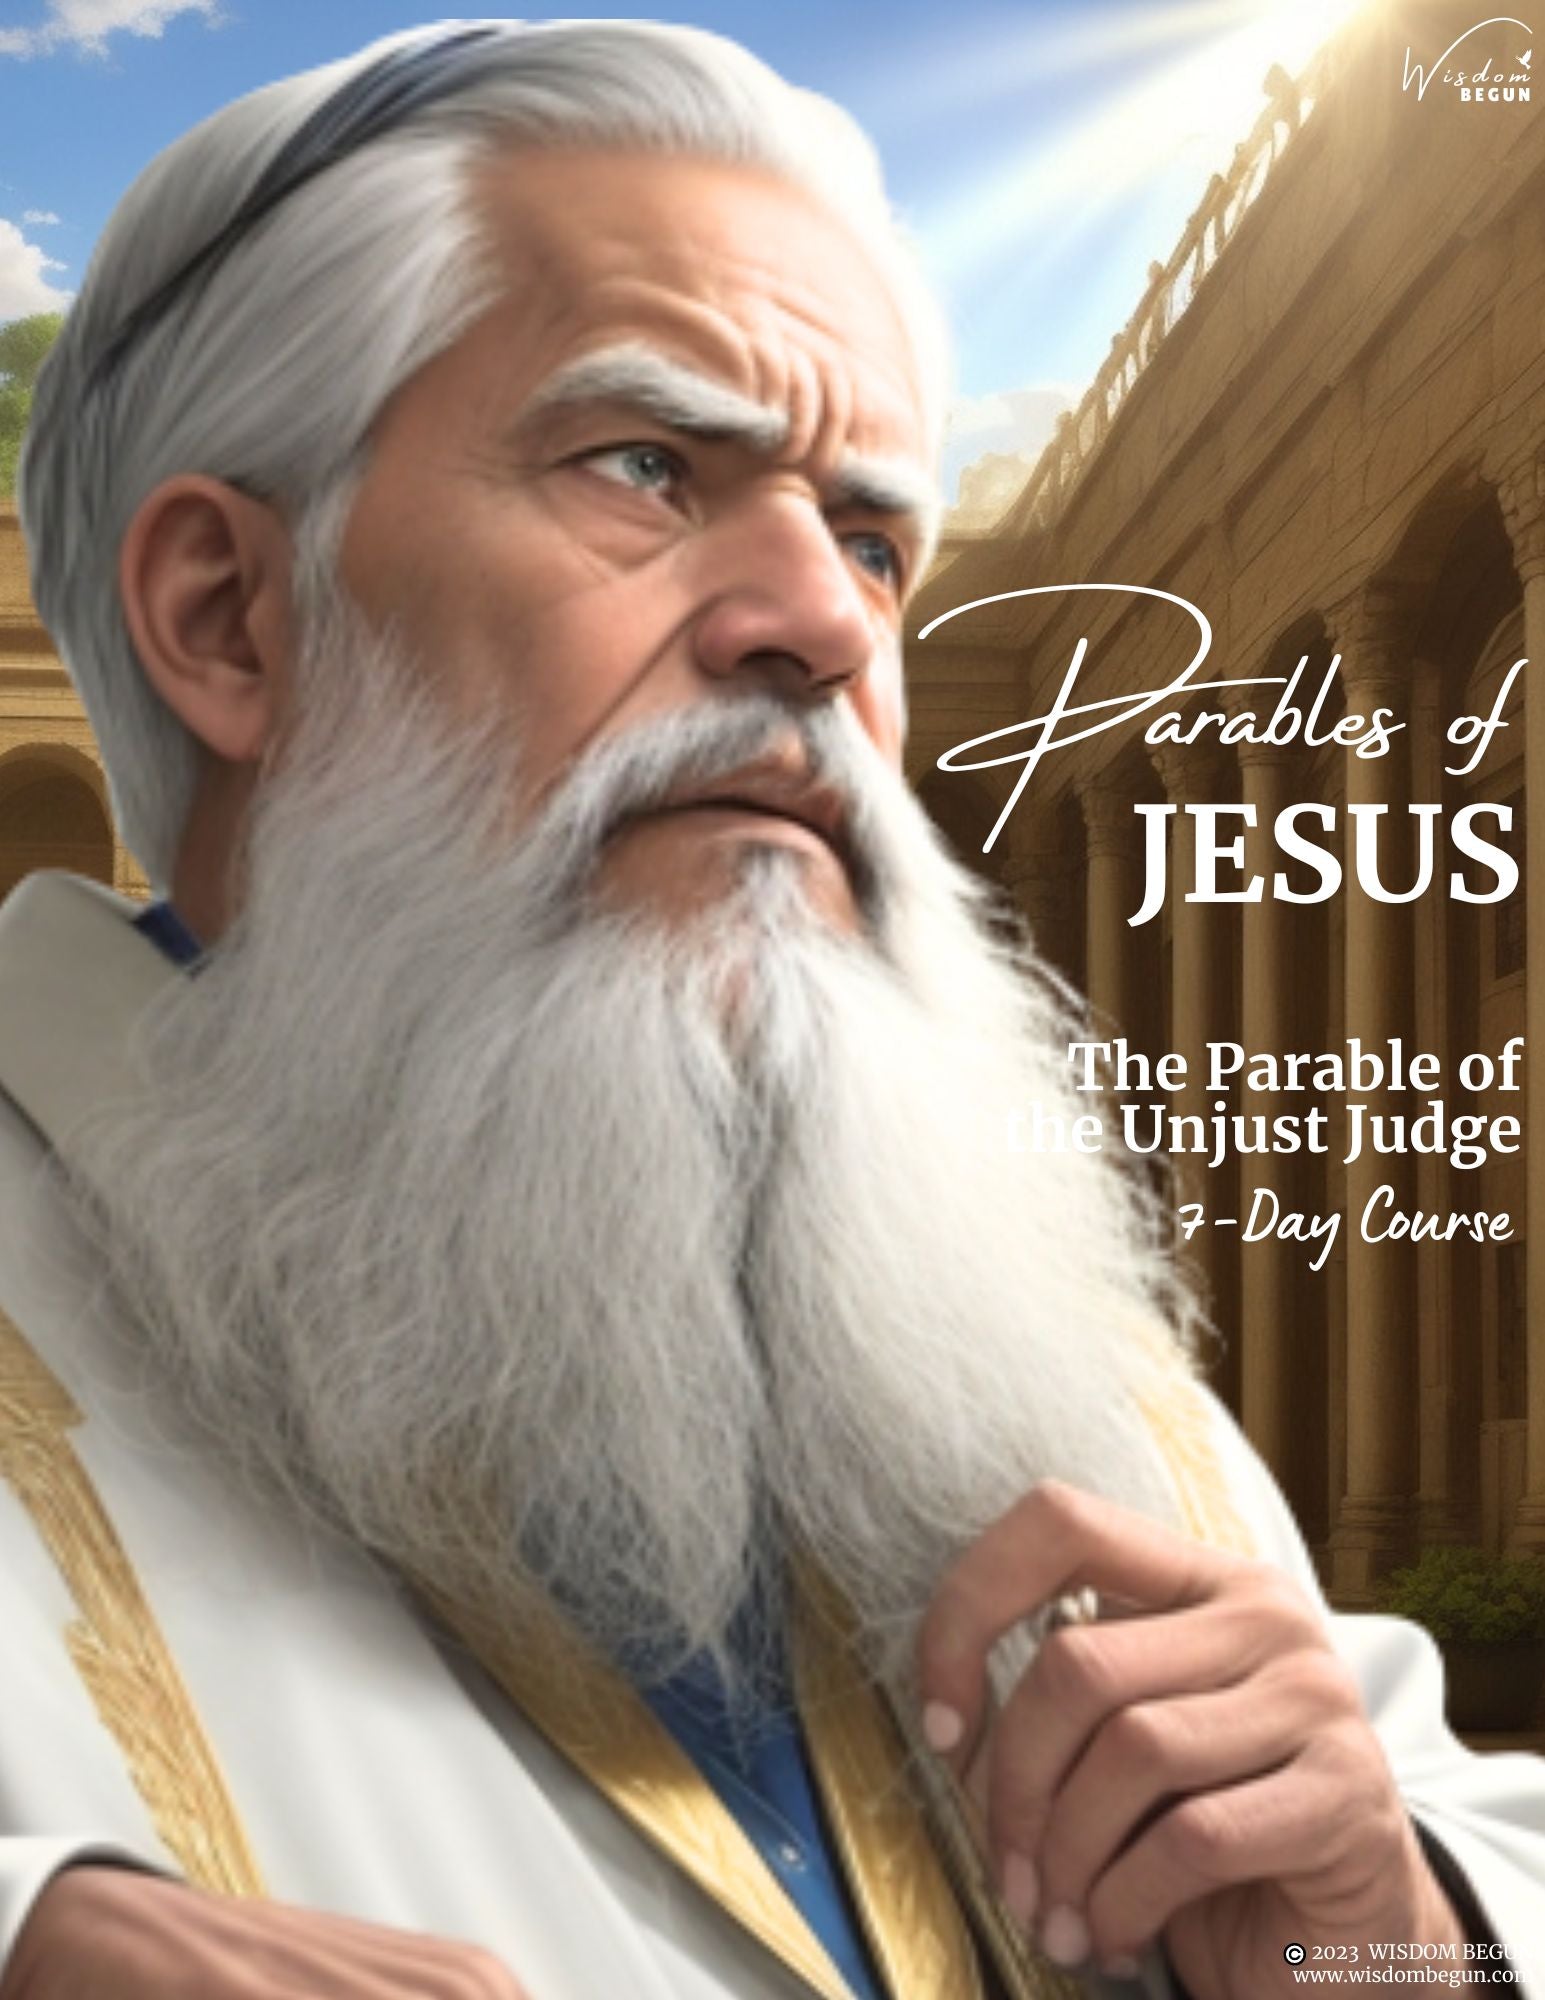 Parables of Jesus 7-Day Course: The Unjust Judge